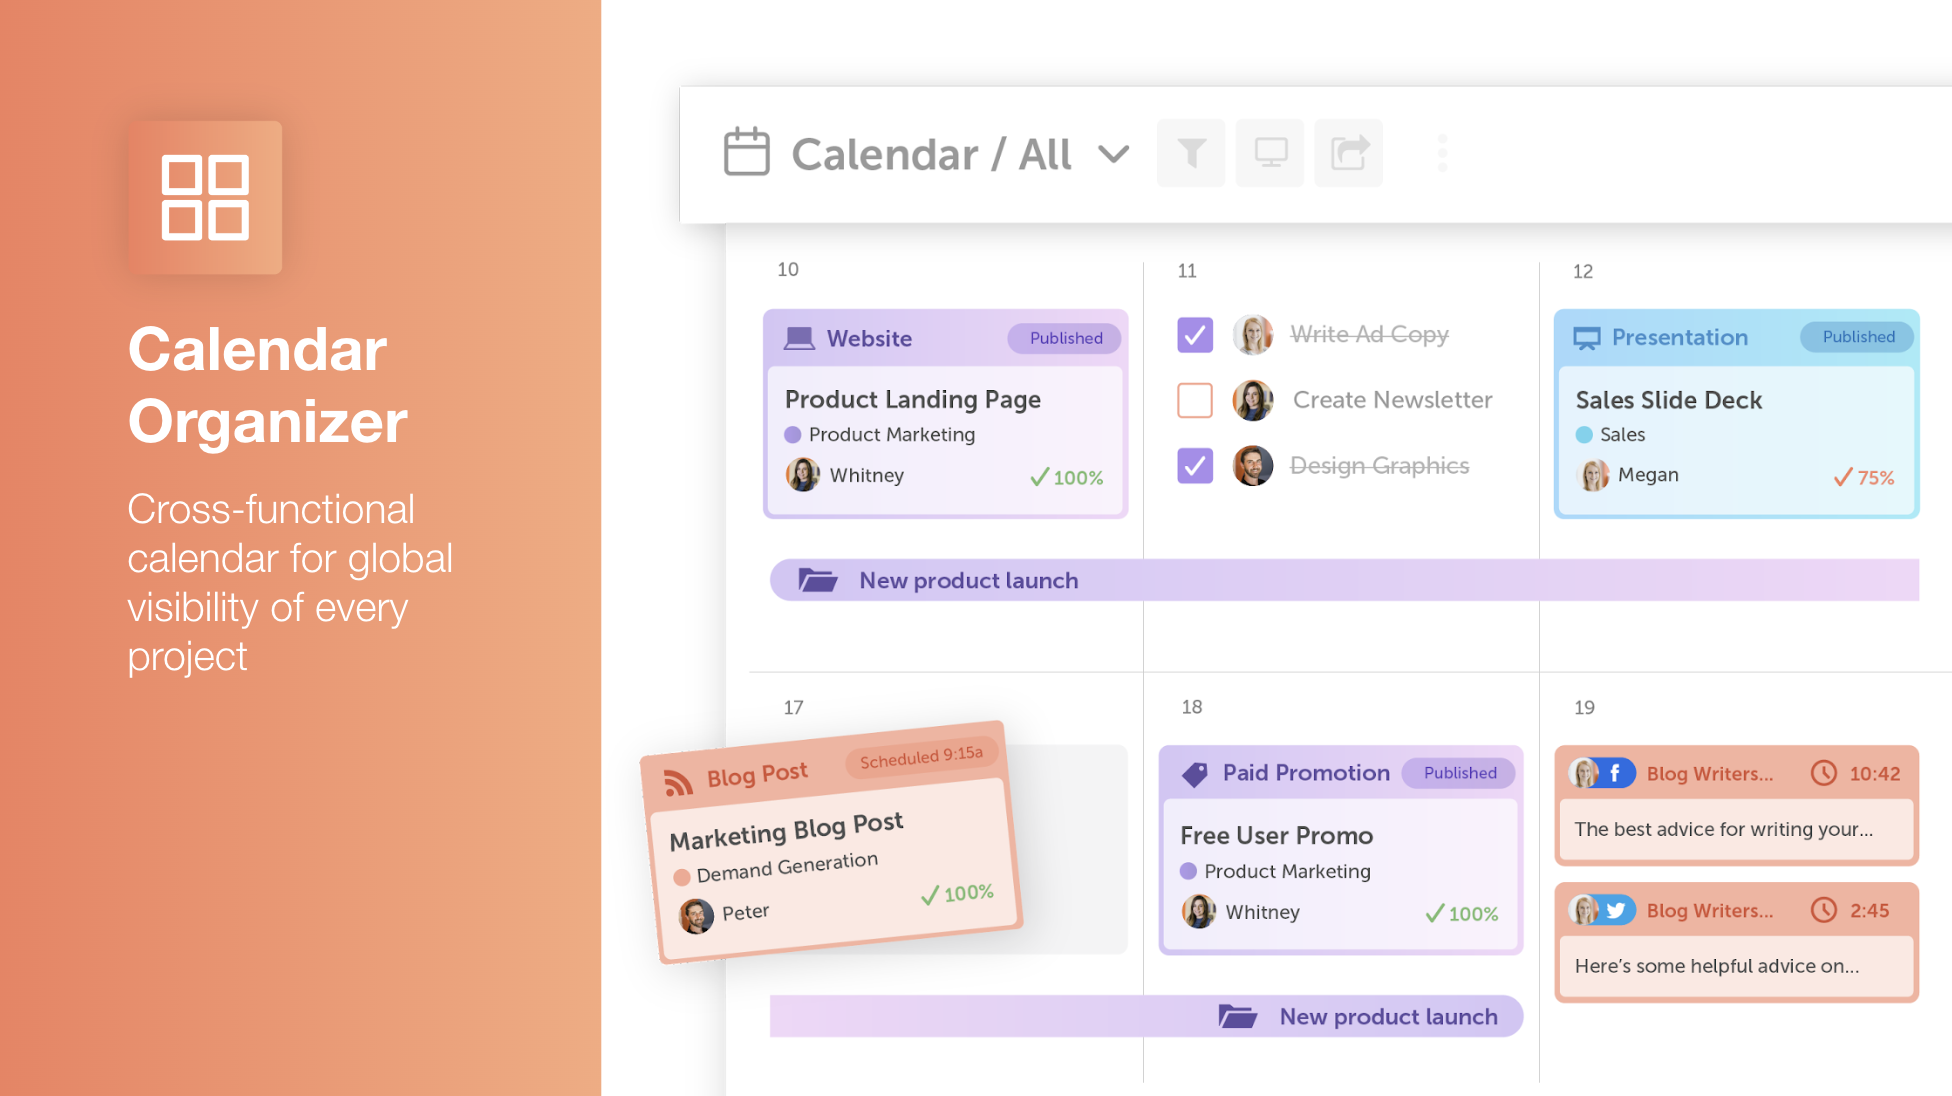 Visualize your entire marketing strategy in real-time. With Calendar Organizer, you'll see every project & campaign in a single calendar. Plan, create, & publish content from your calendar. Give execs live updates of your work. And more!